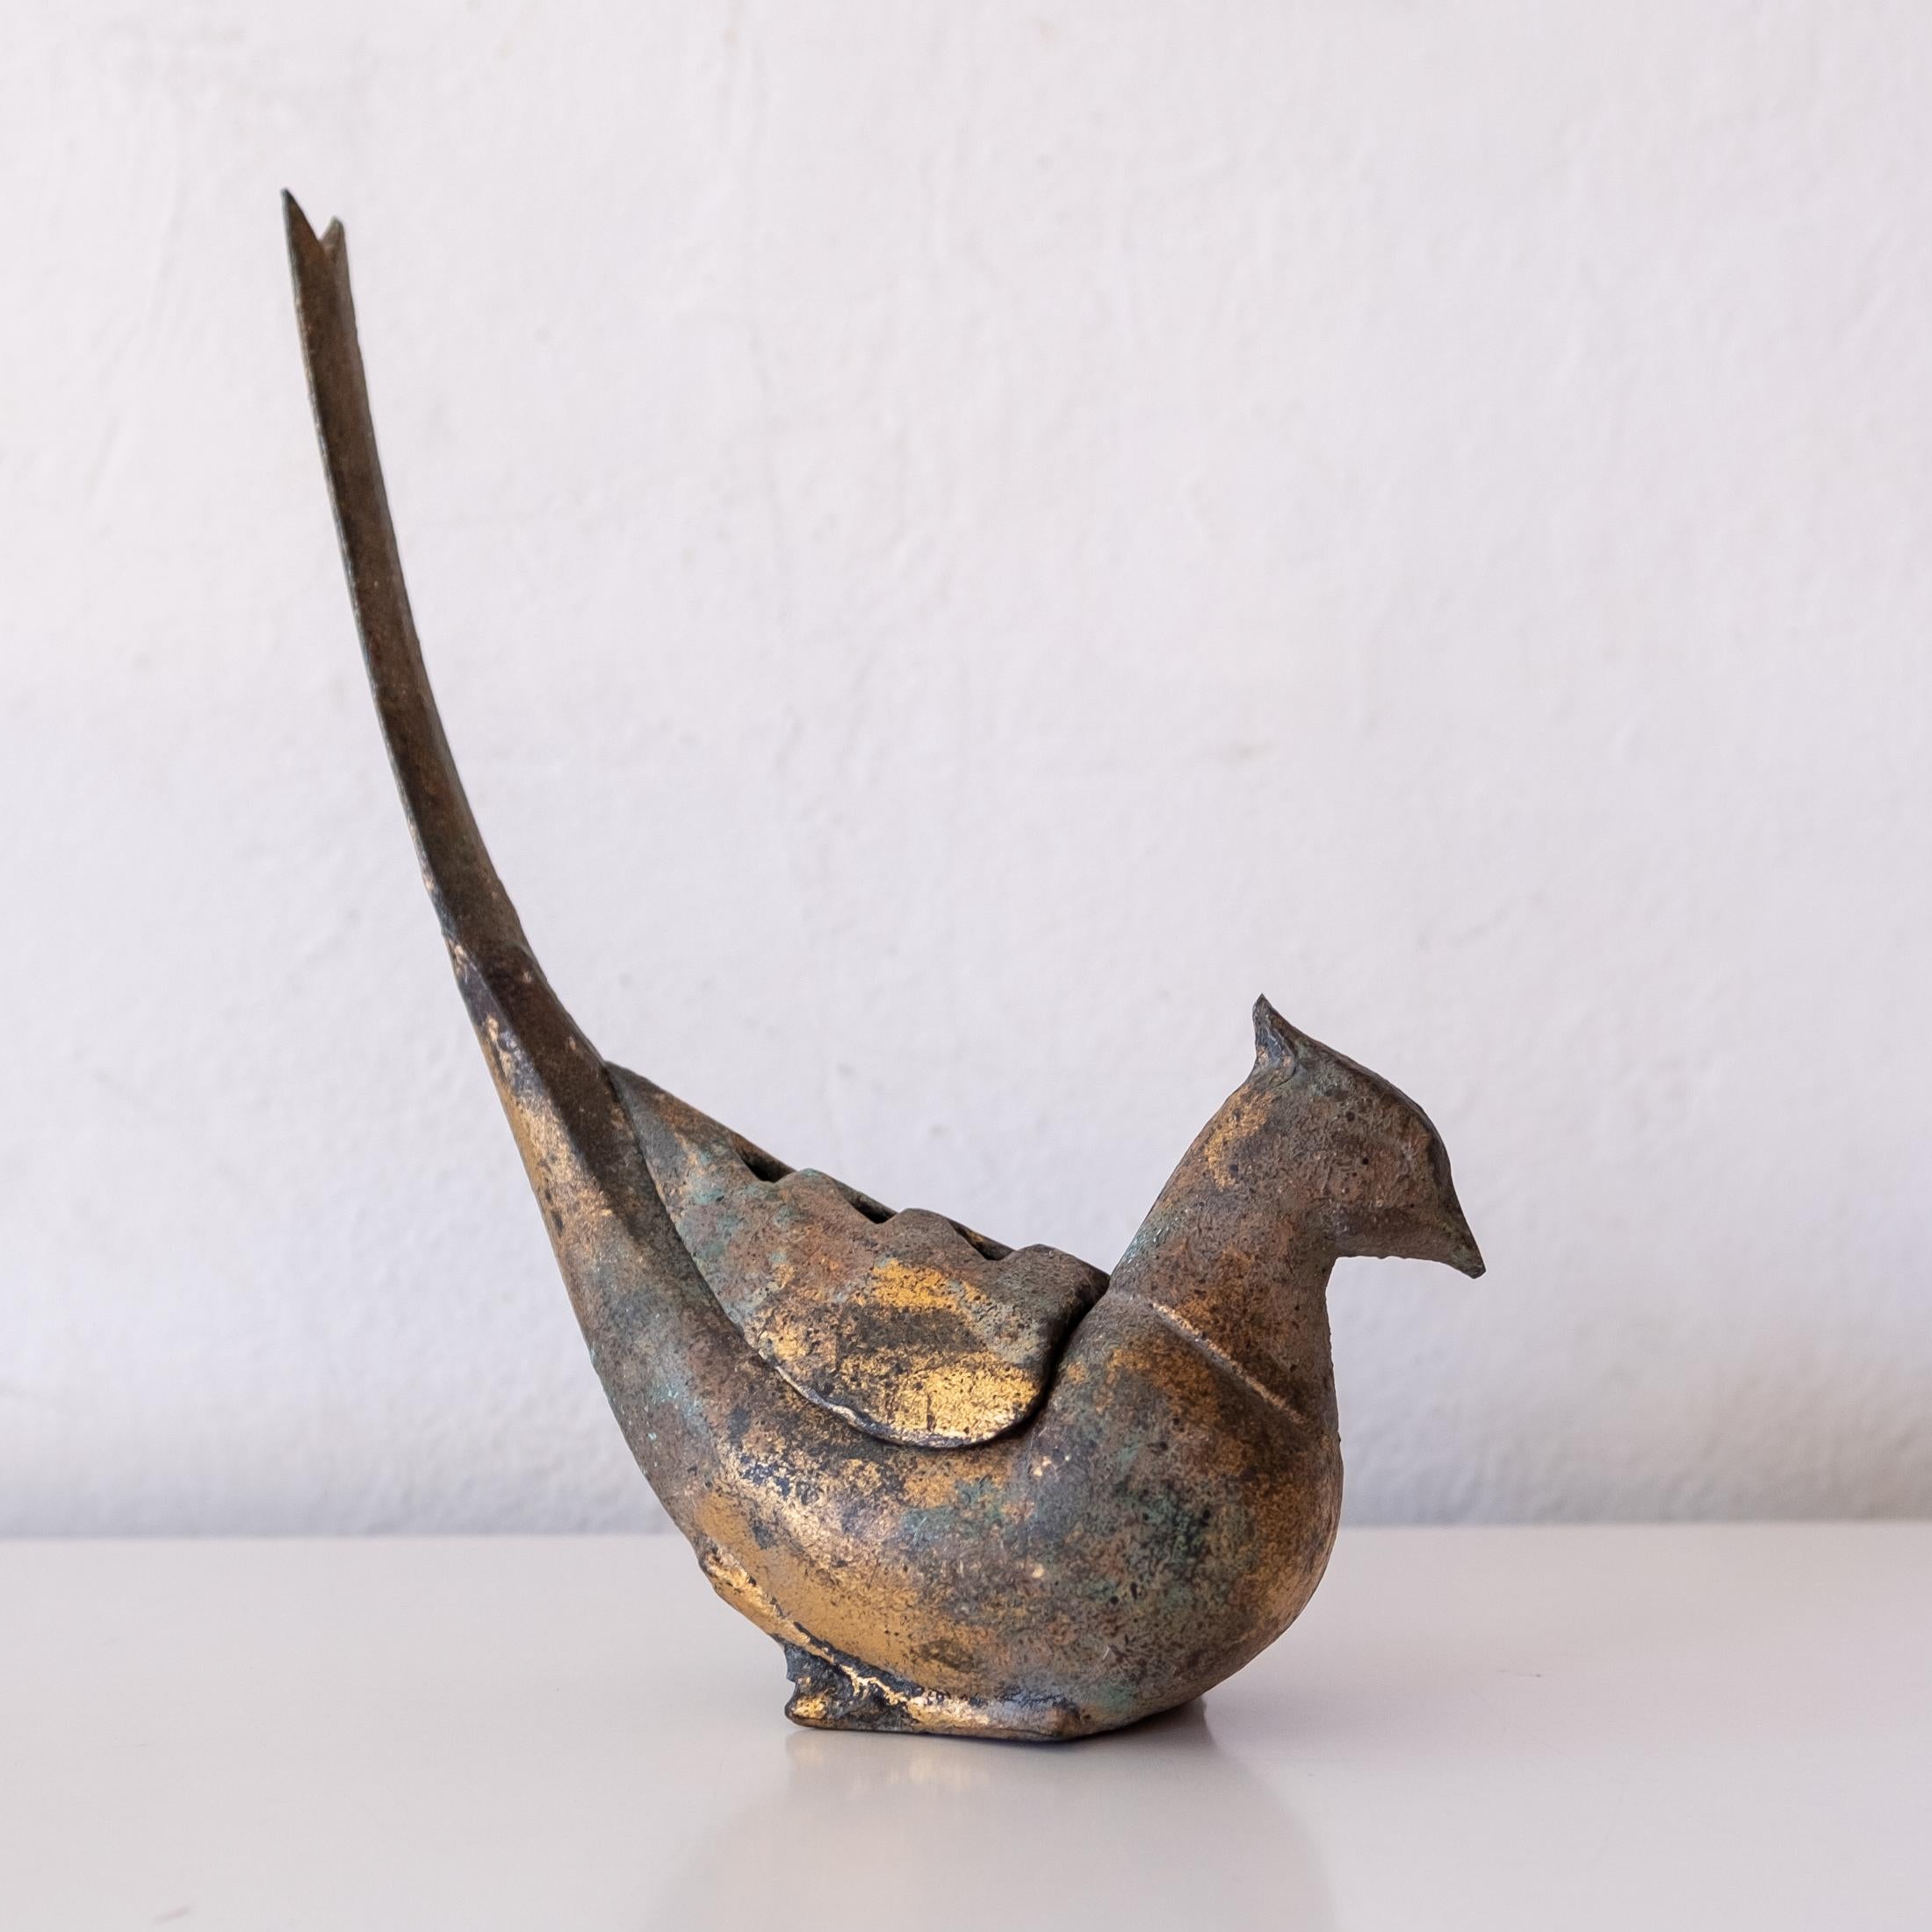 Iron bird sculpture with a nice patina. Removable vented piece, perhaps for burning incense or flower arrangements, 1950s. Iron bird sculpture with a nice patina. Removable vented piece, perhaps for burning incense or flower arrangements, 1950s.